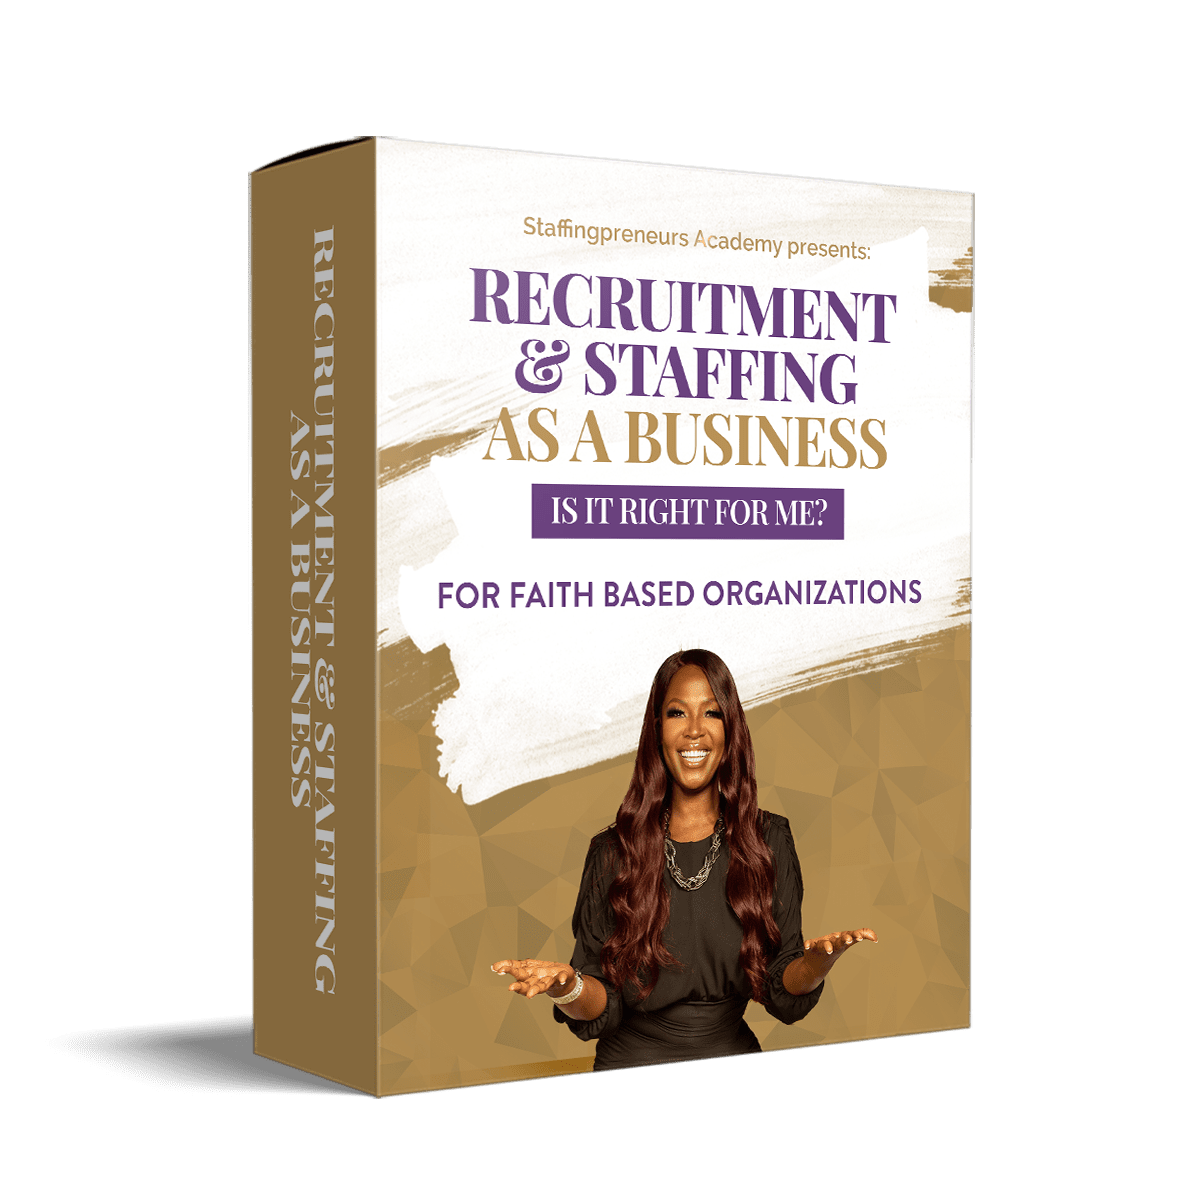 Download the Guide: Is It Right For Me: Is Starting a Recruitment & Staffing Business RIght For Your Faith Based Organization